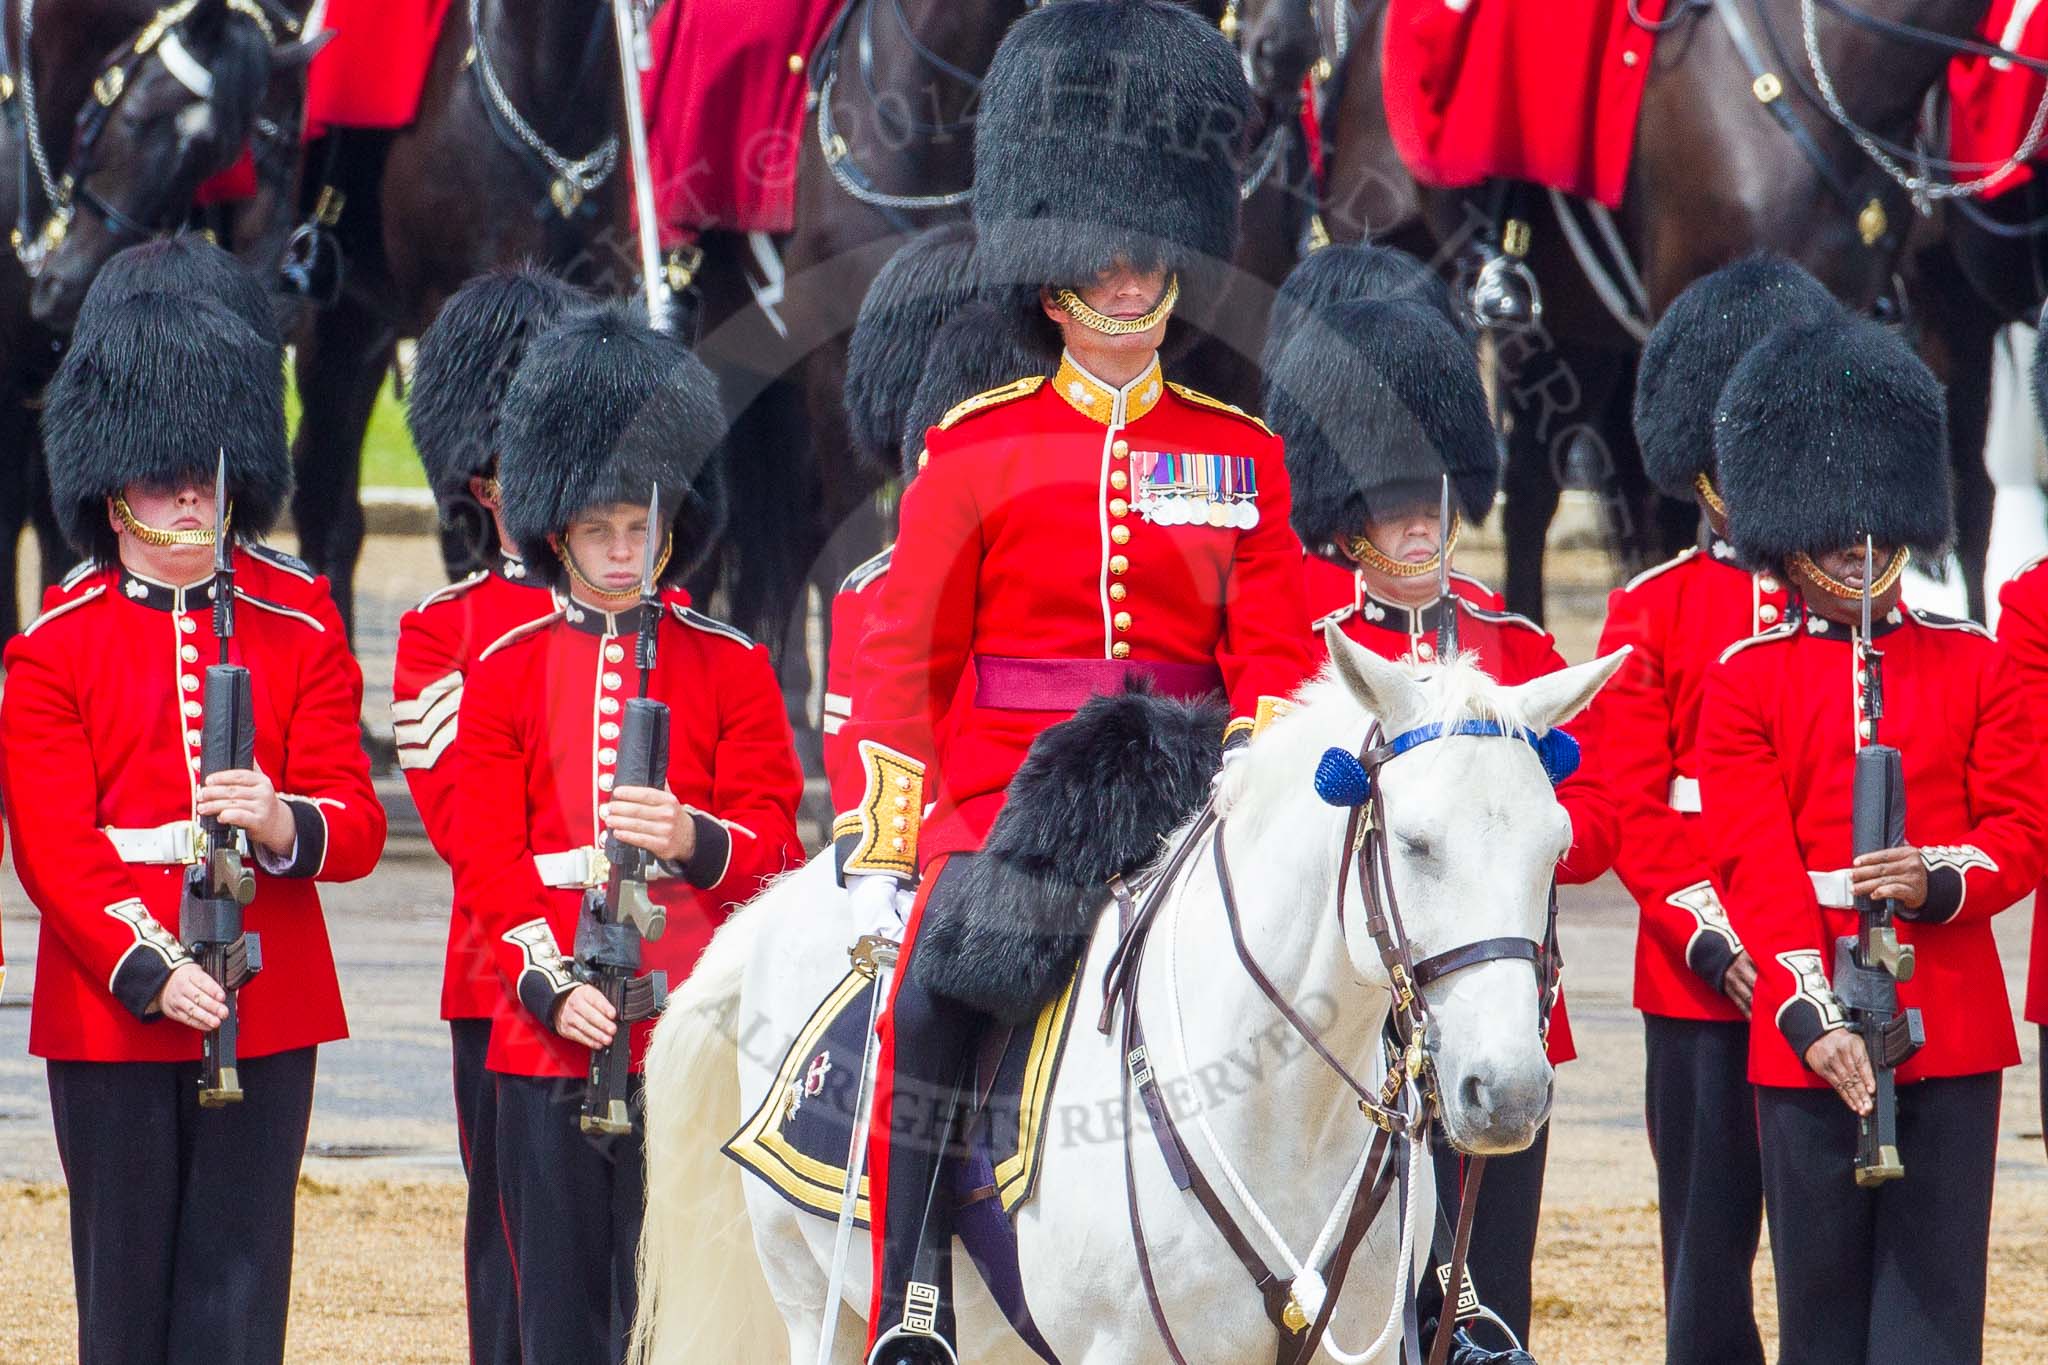 The Colonel's Review 2014.
Horse Guards Parade, Westminster,
London,

United Kingdom,
on 07 June 2014 at 12:01, image #690